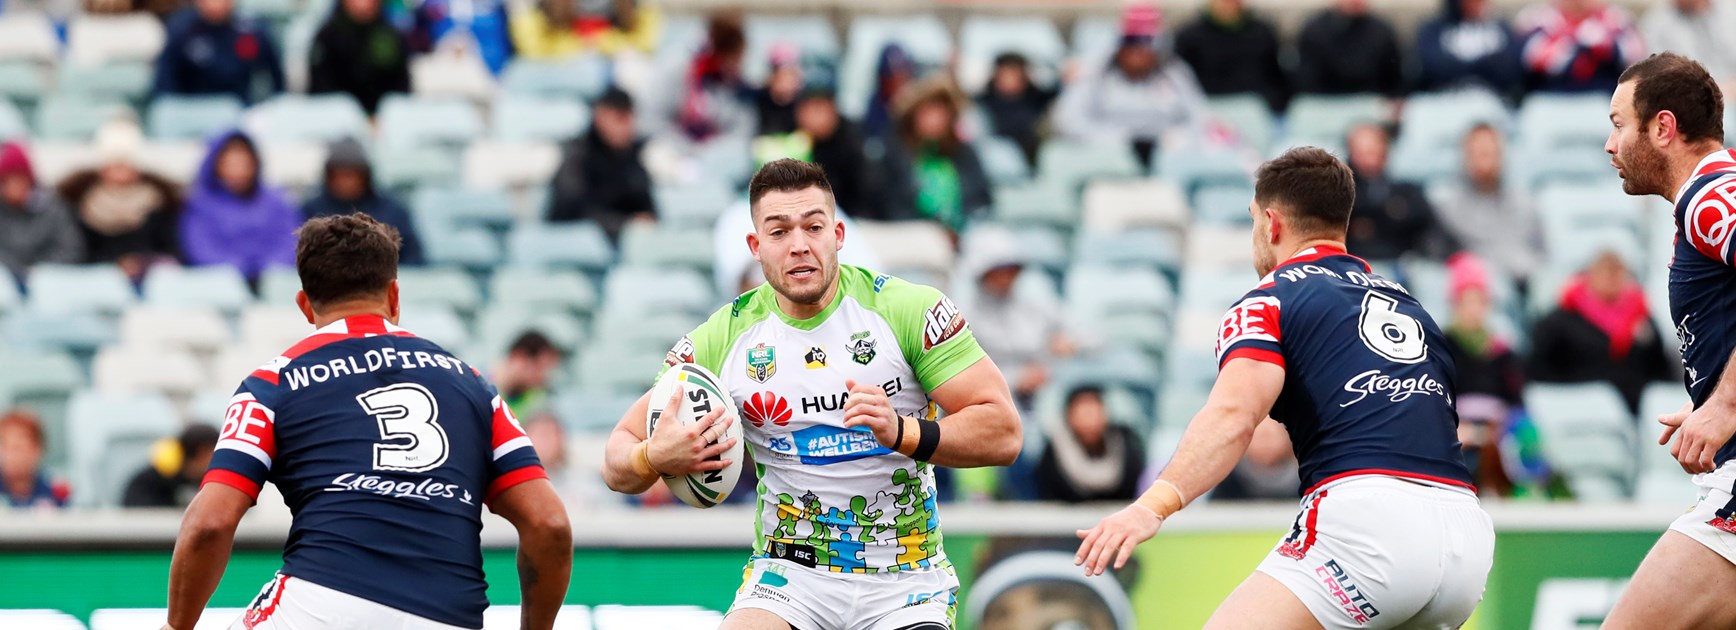 Match Report: Raiders hold off Roosters for inspiring win